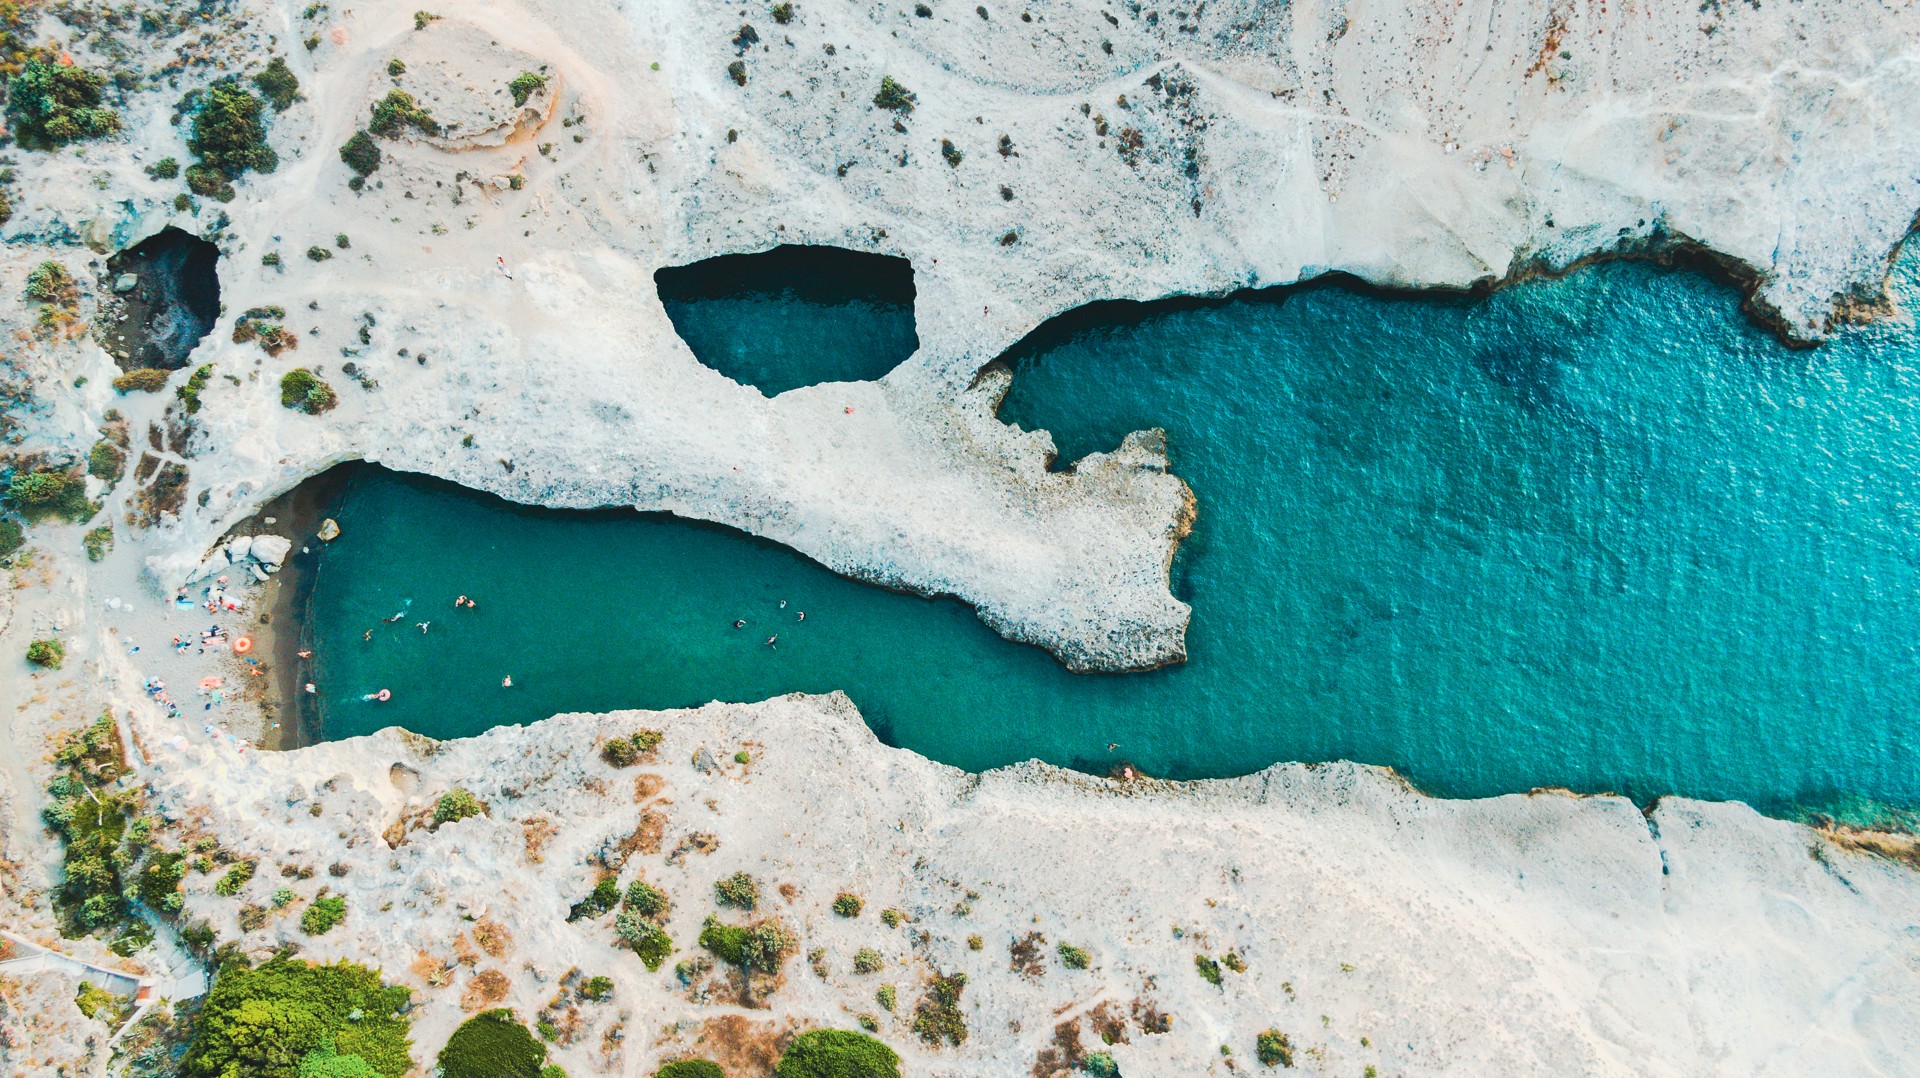 Sarakiniko, an extraordinary scene of chalk-white rock, smoothed and shaped by time